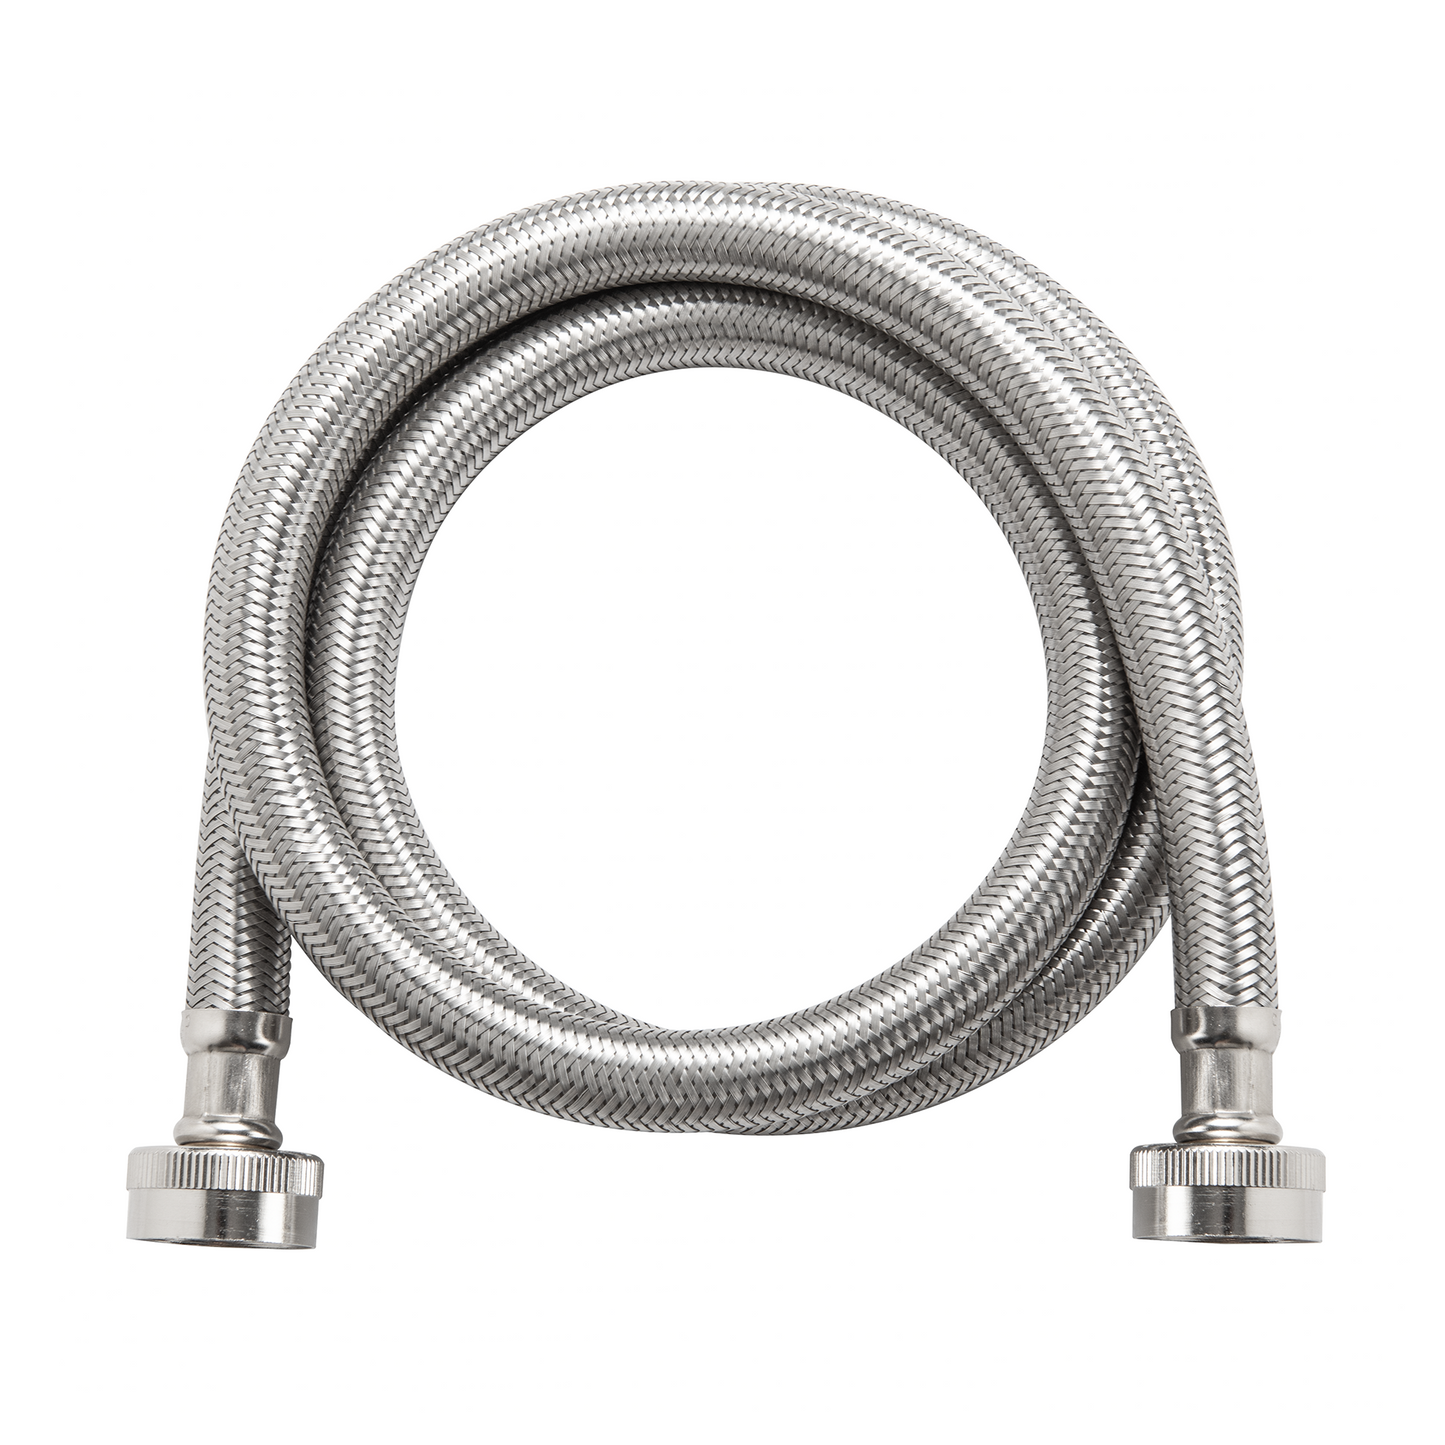 Smart Laundry System - Water Supply Hoses (4FT) (LM001-WSH)